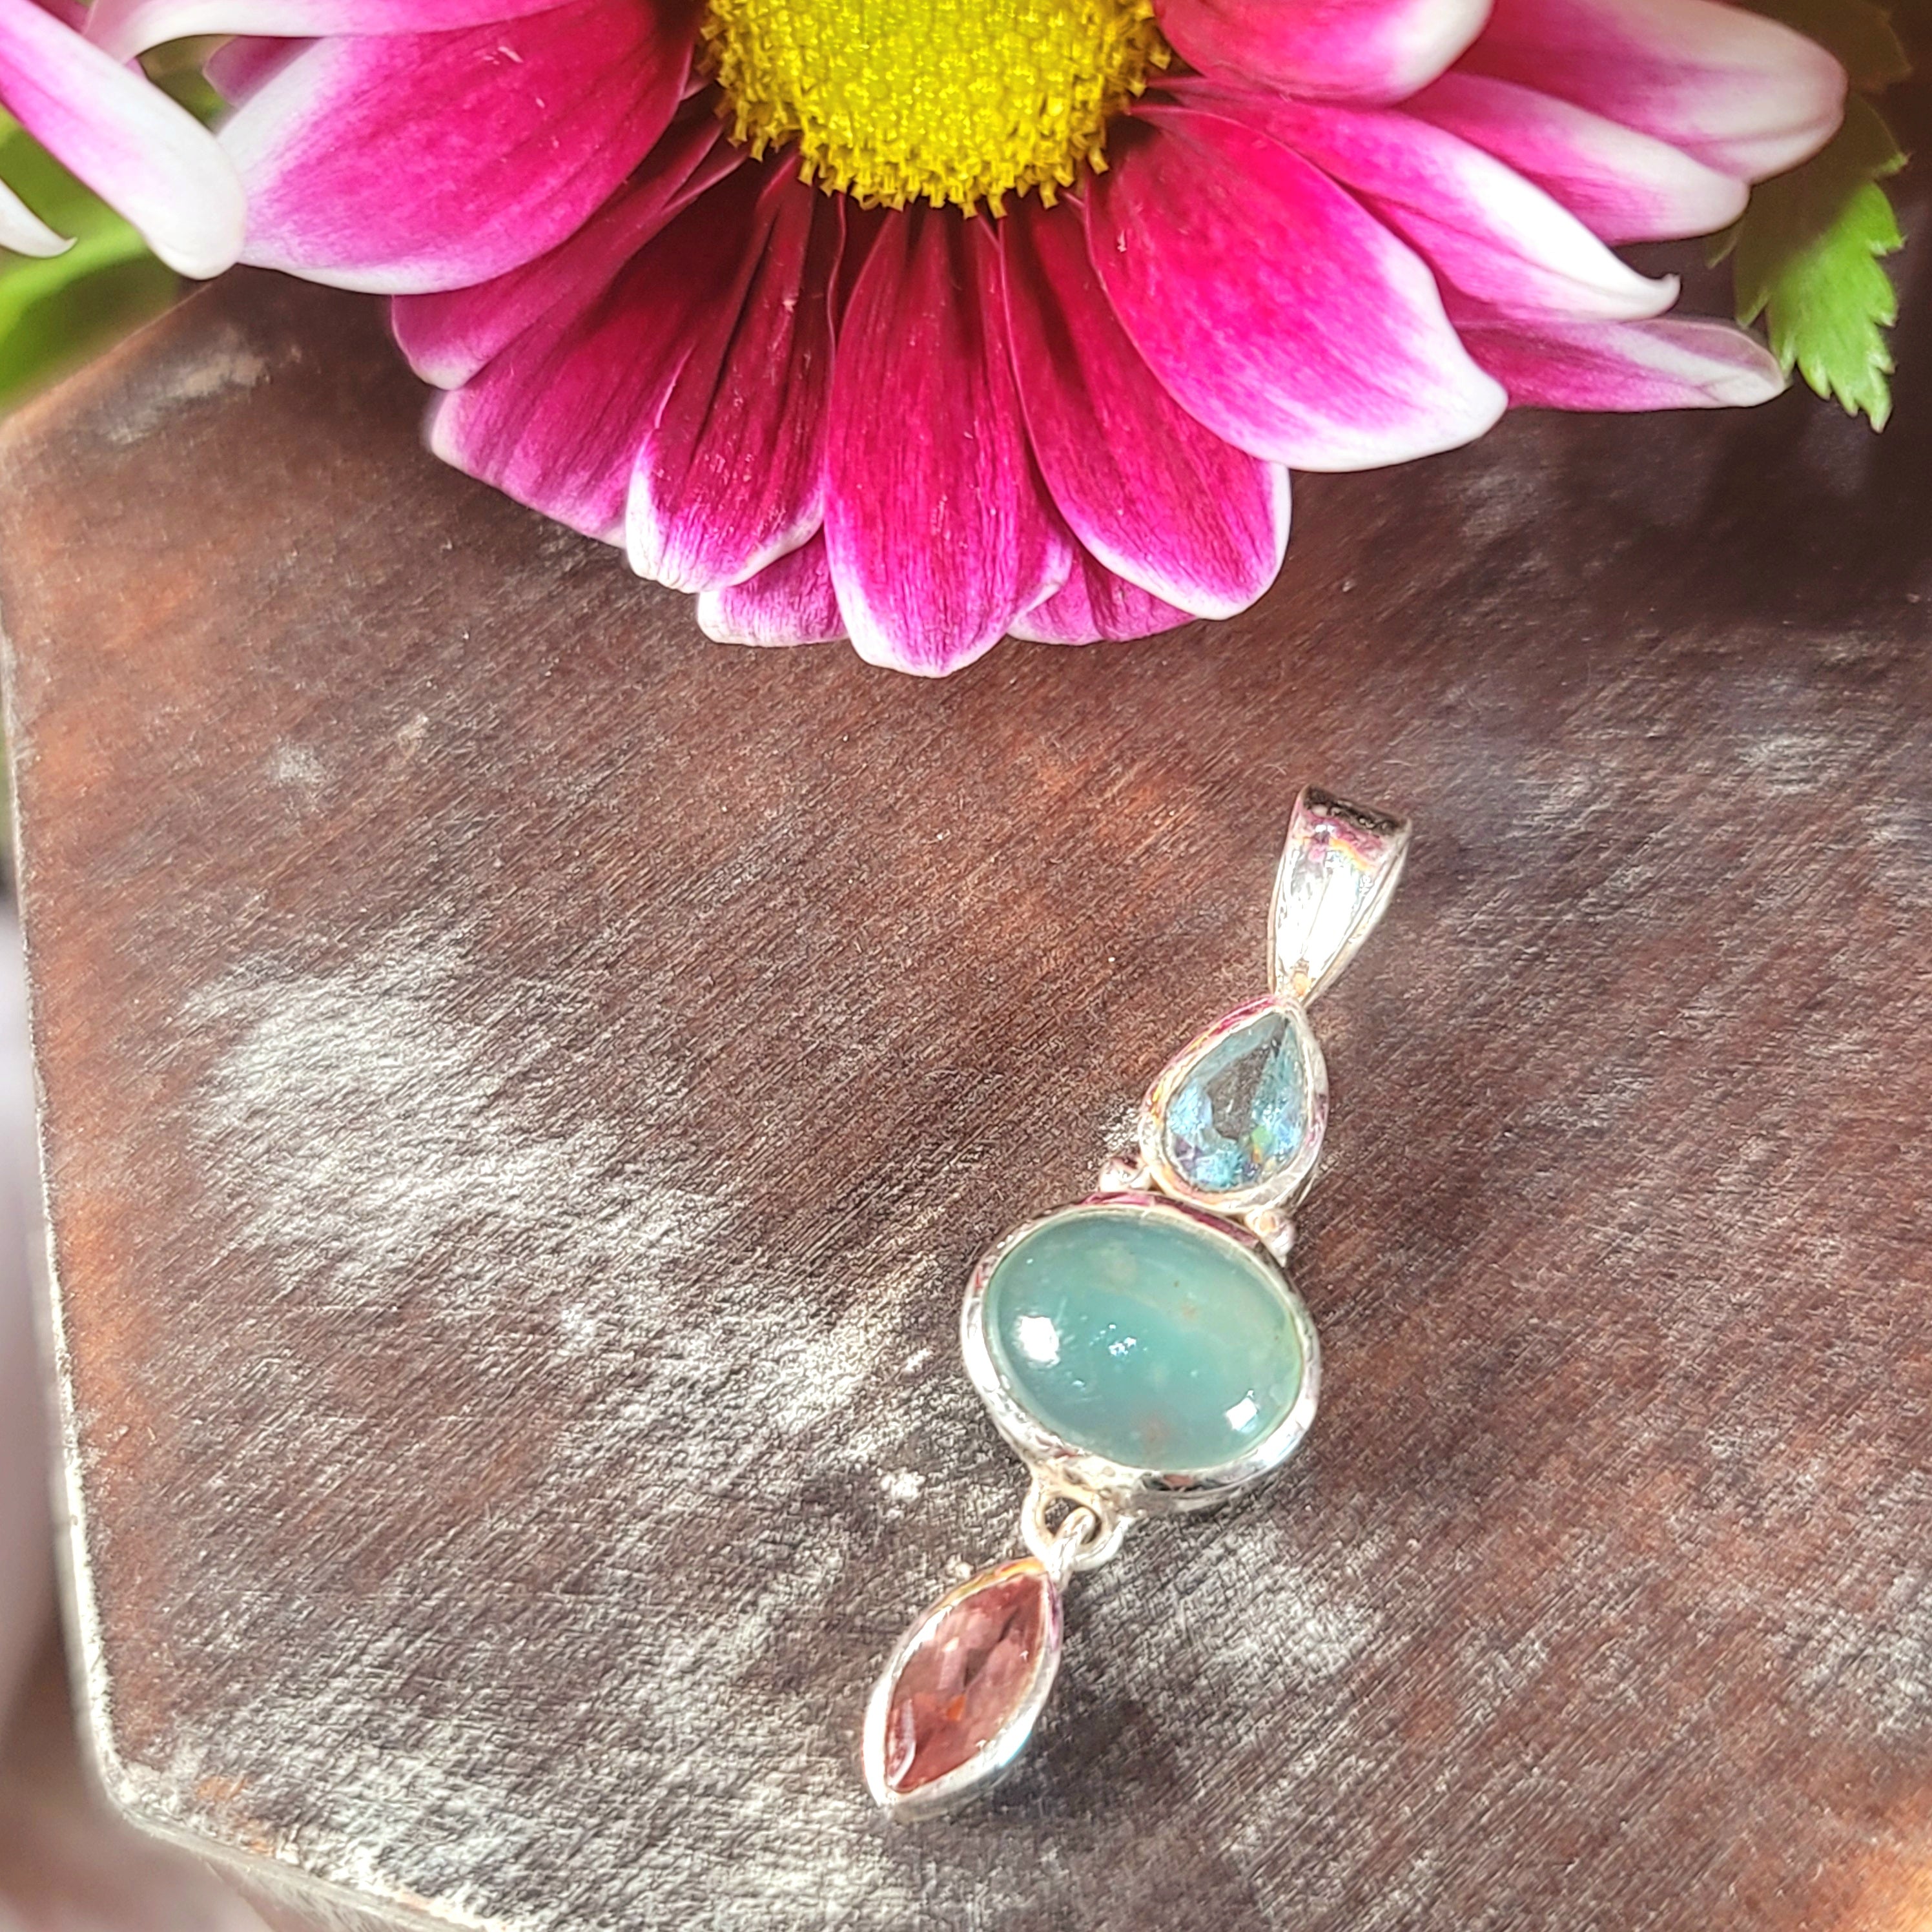 Blue Apatite x Aquamarine x Pink Tourmaline Pendant .925 Silver for Expressing your Heart's Desires